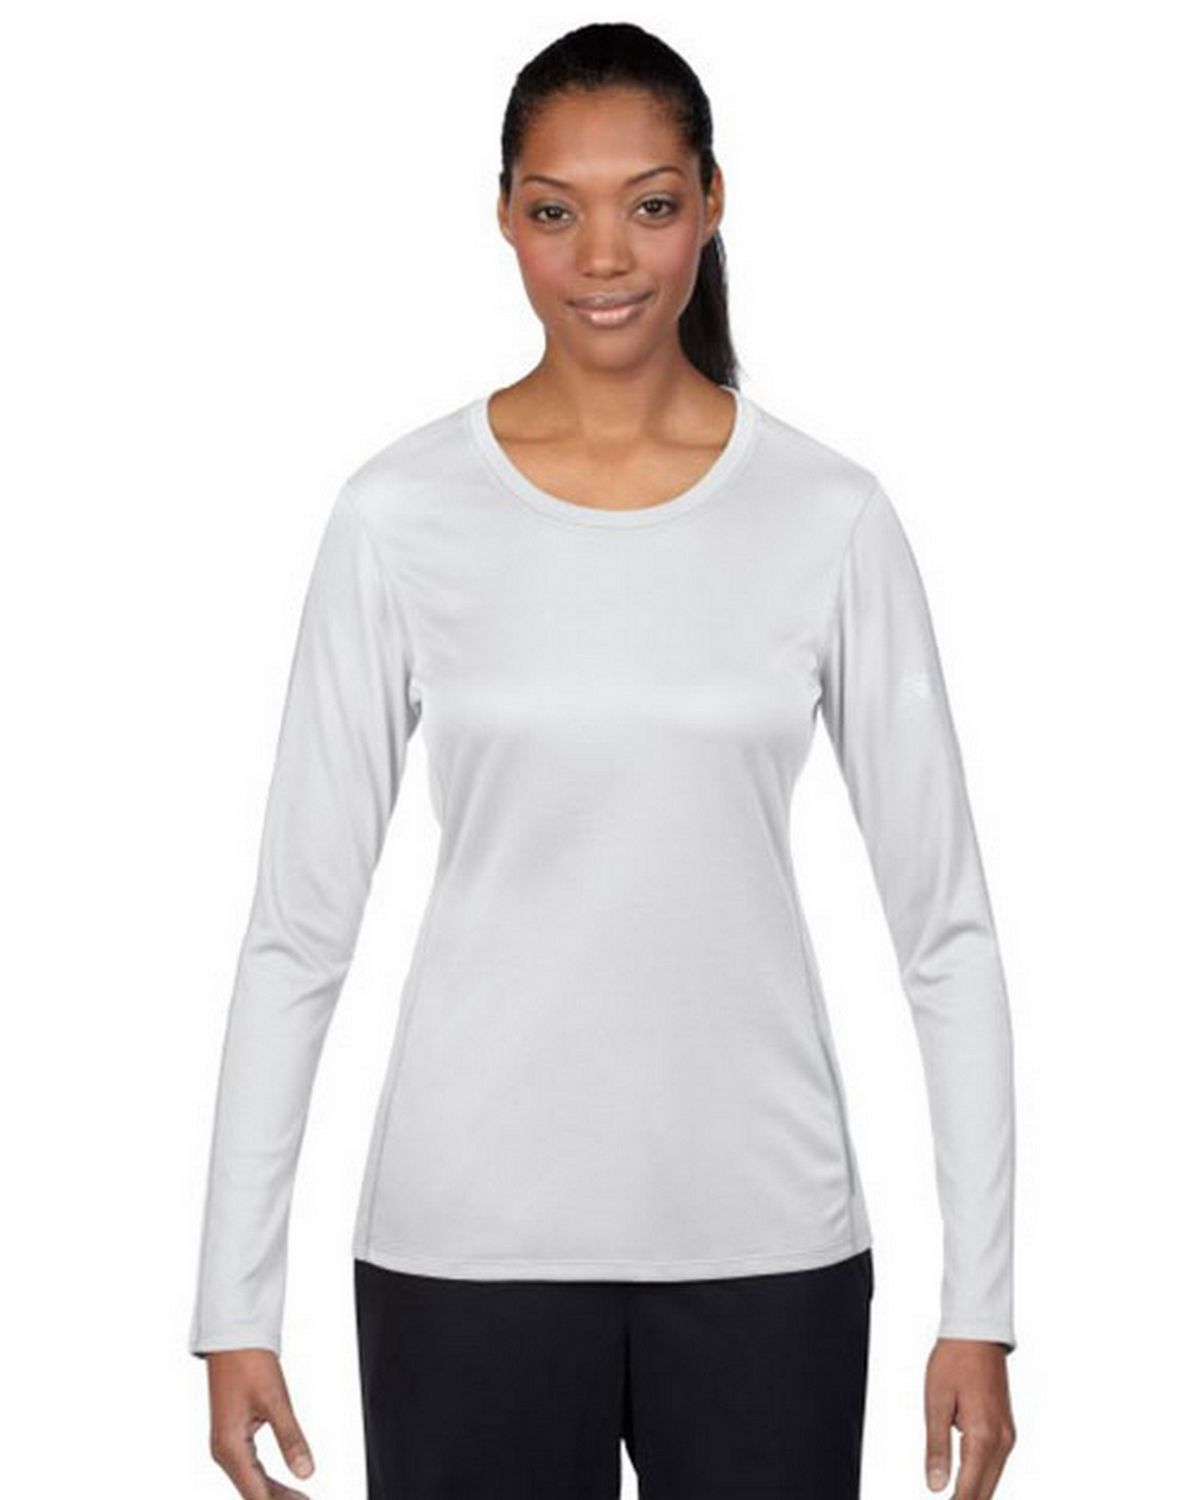 Reviews about New Balance 9119L Tempo Ladies Performance Long Sleeve Tee